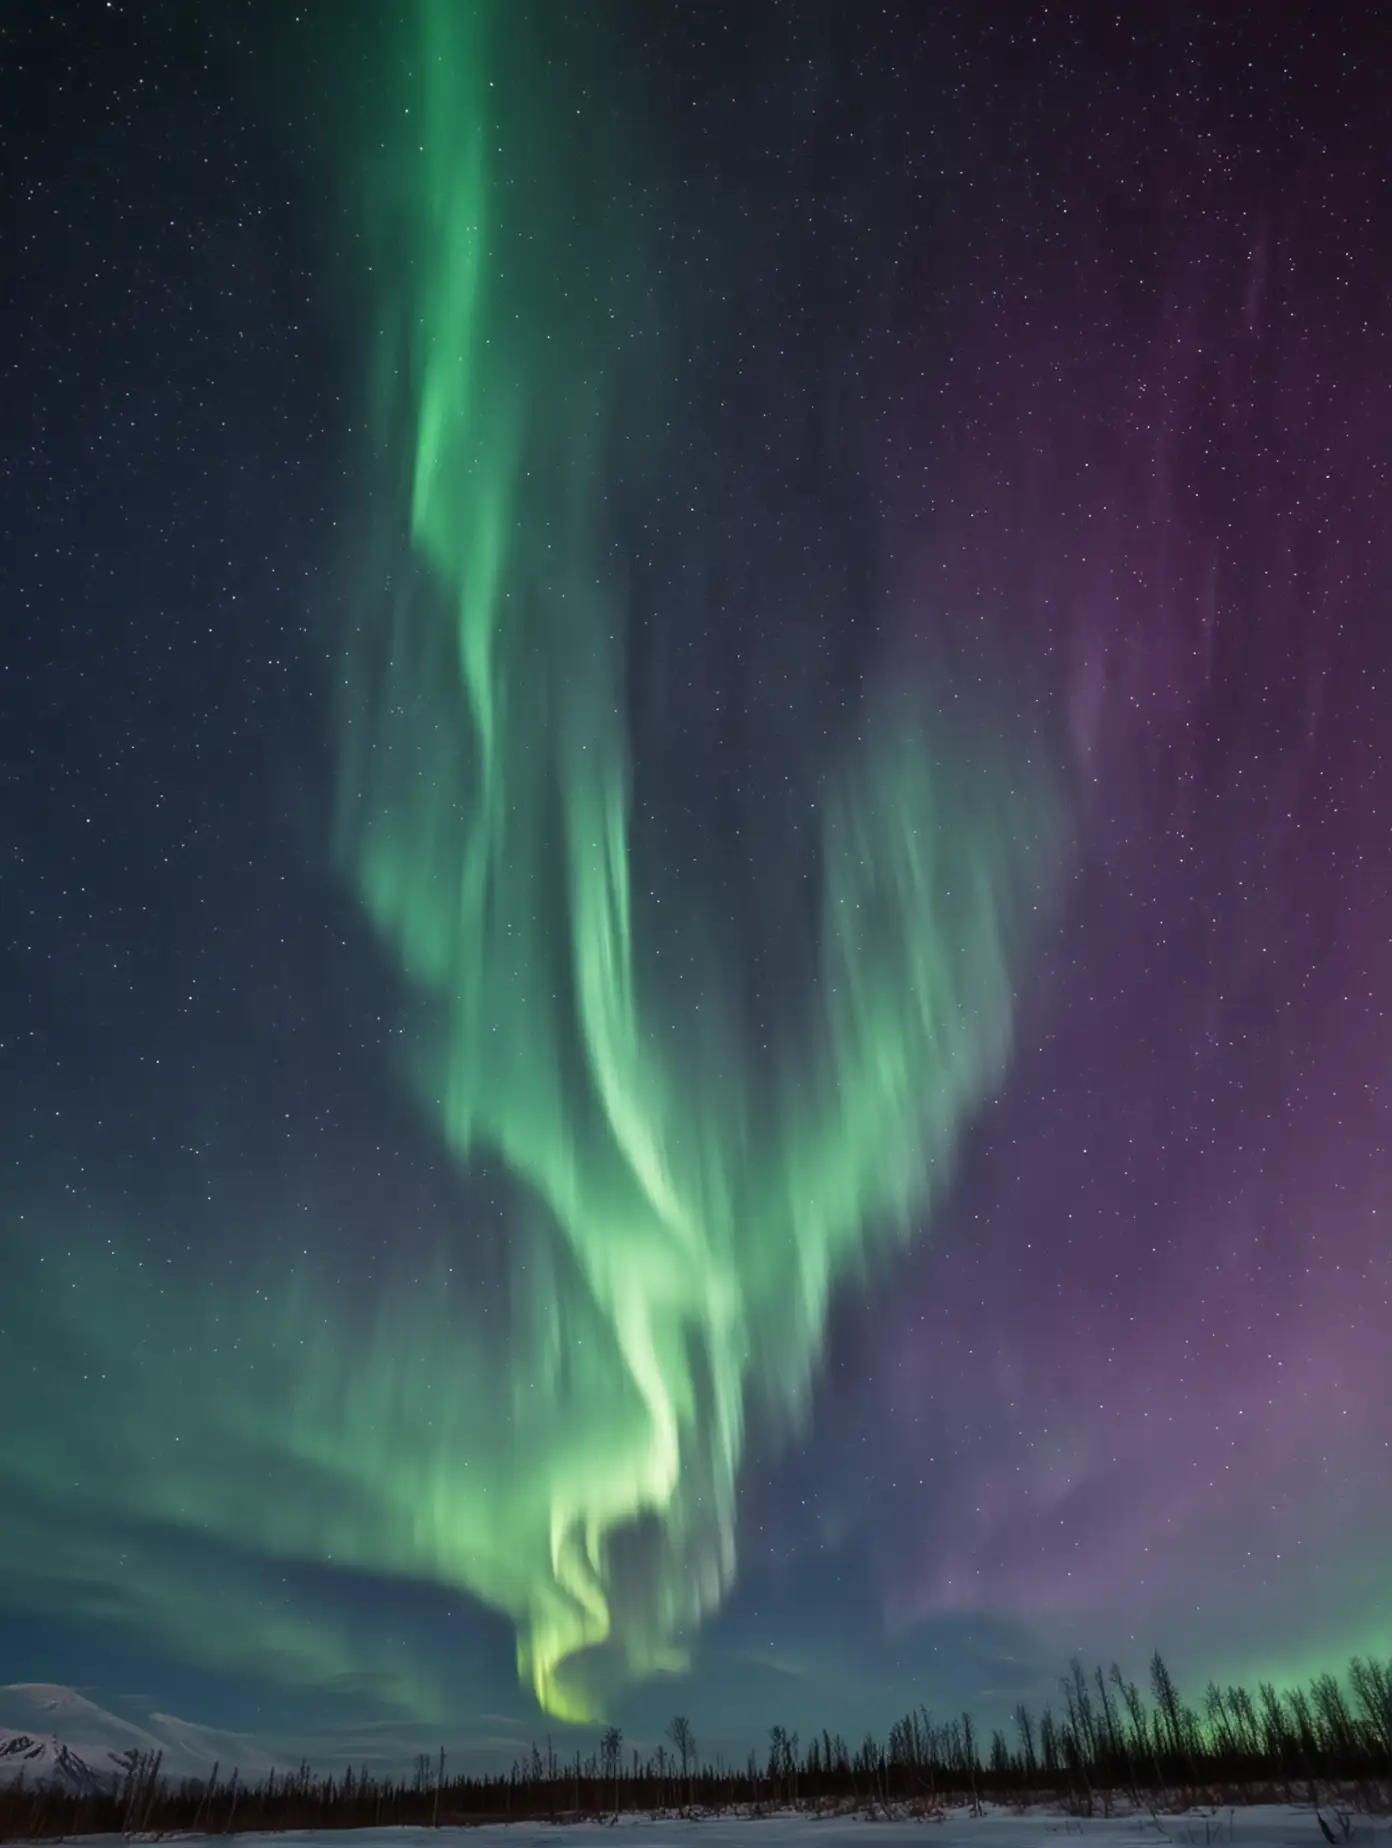 sky only view of northern lights with colors and stars like photo. sky only NO GROUND NO LAND